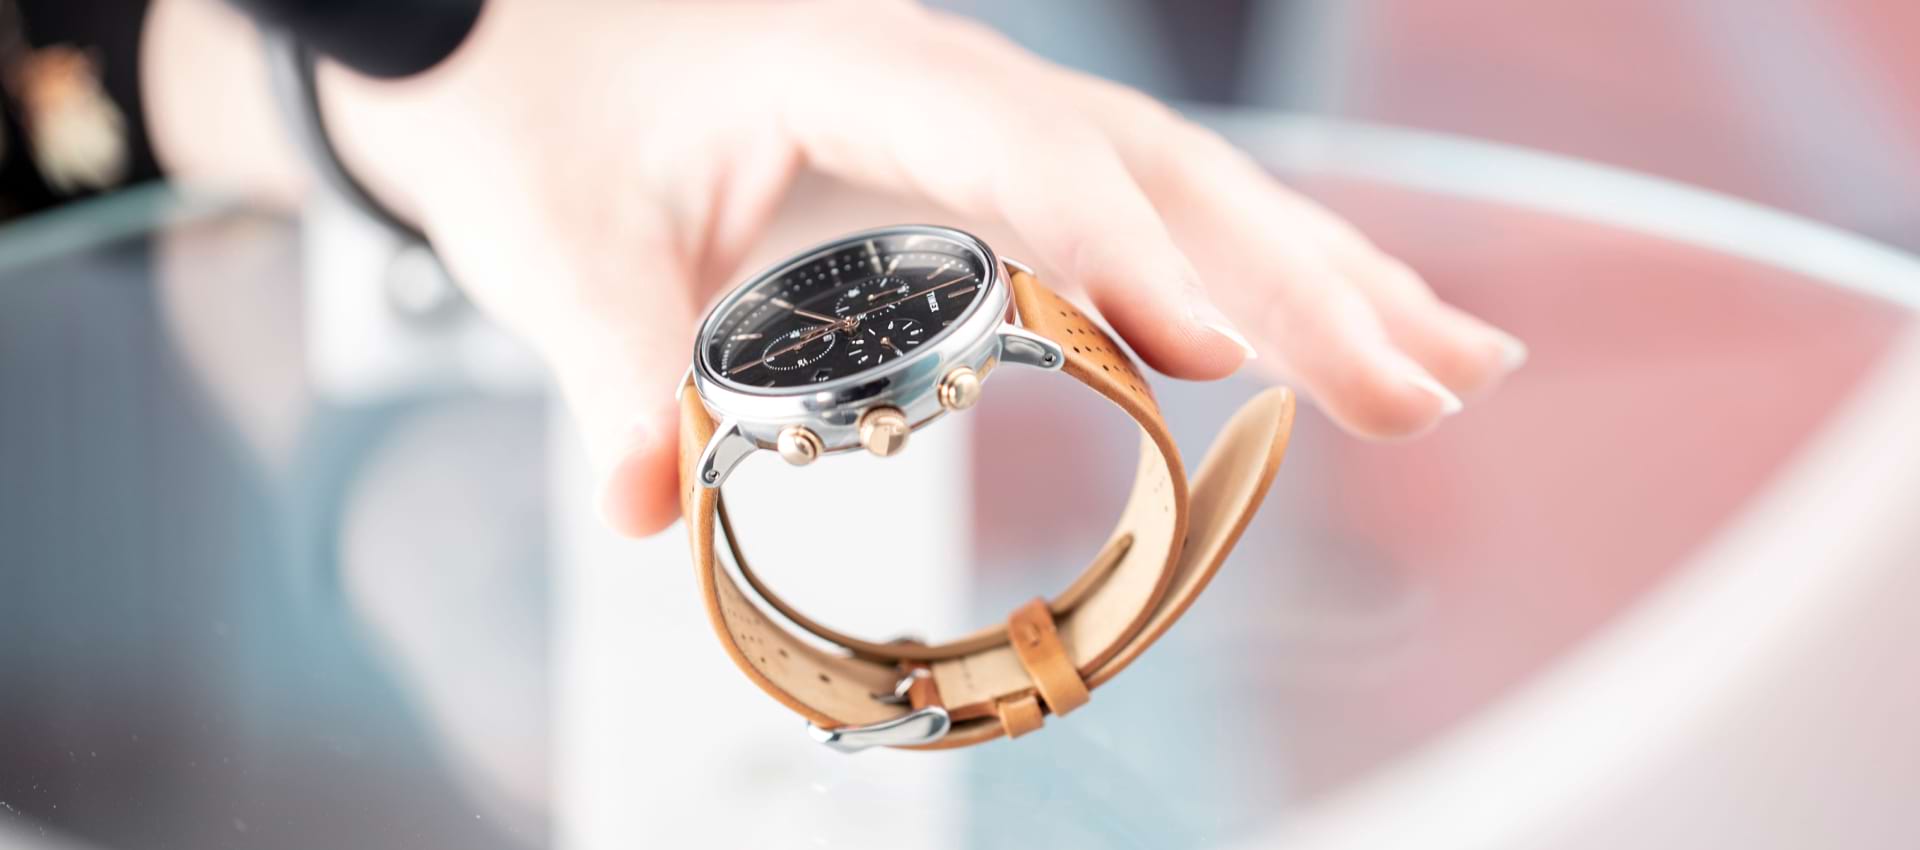 watch product photography ideas